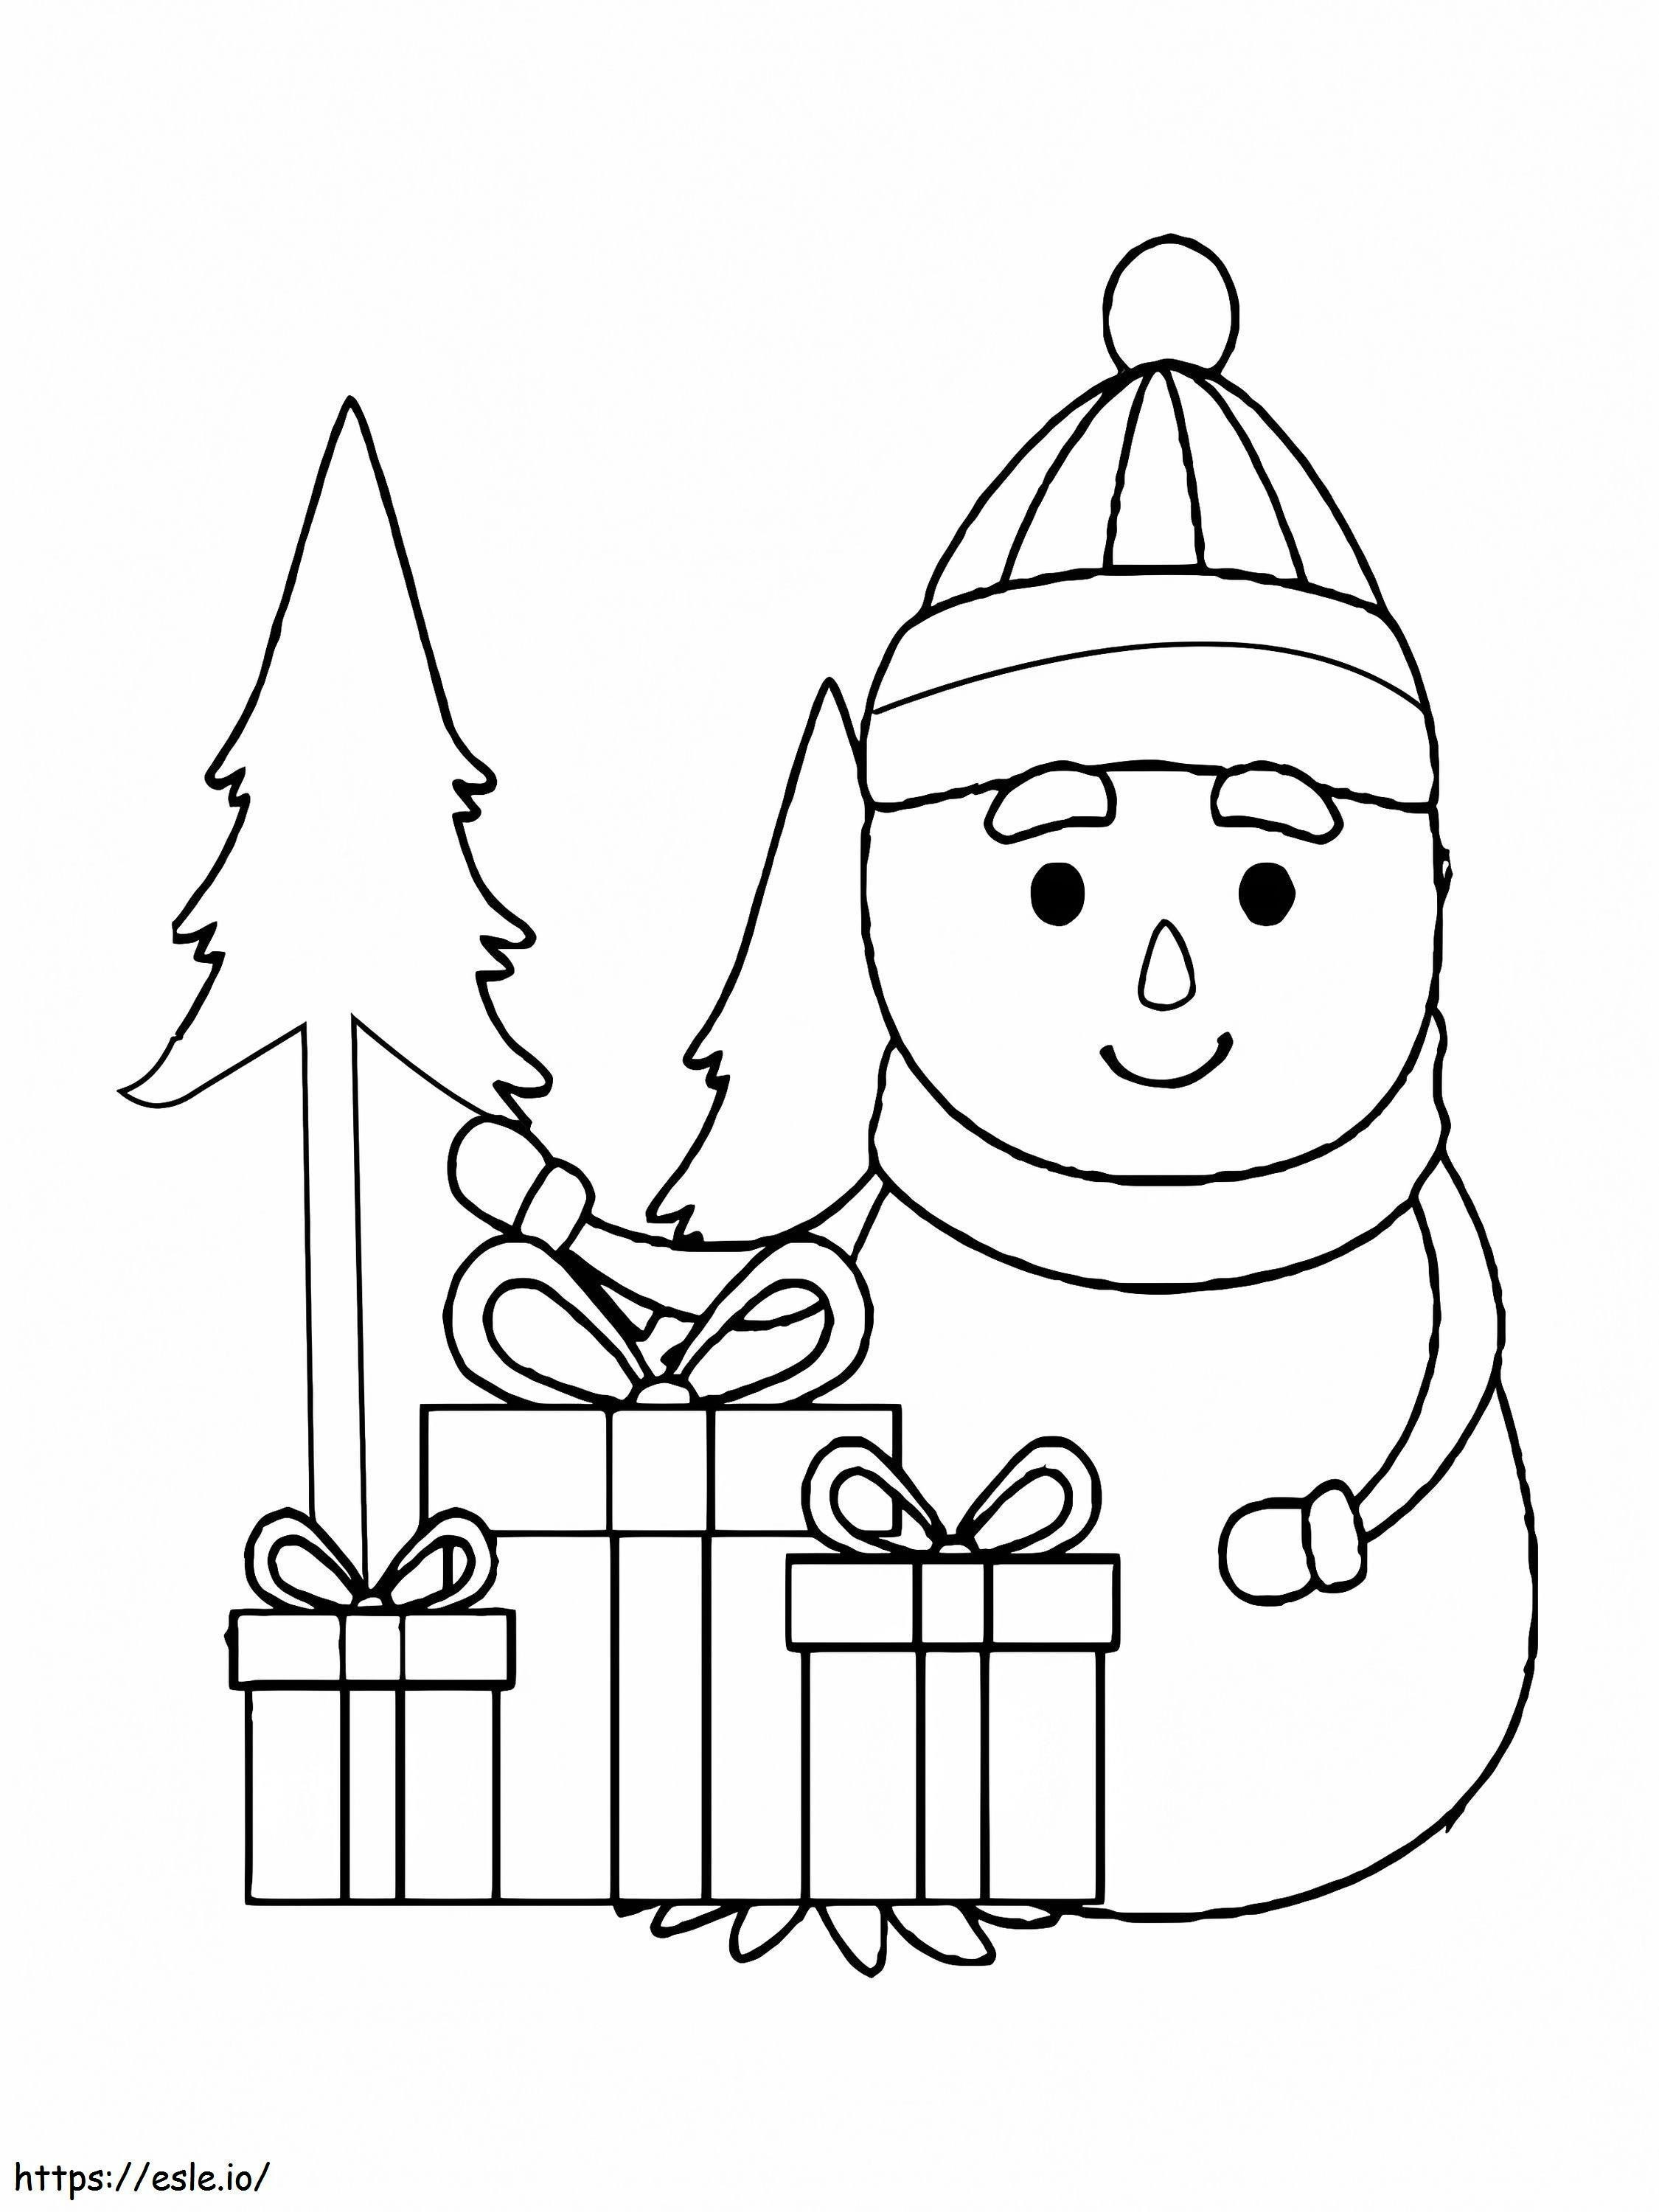 Snowman And Gifts coloring page